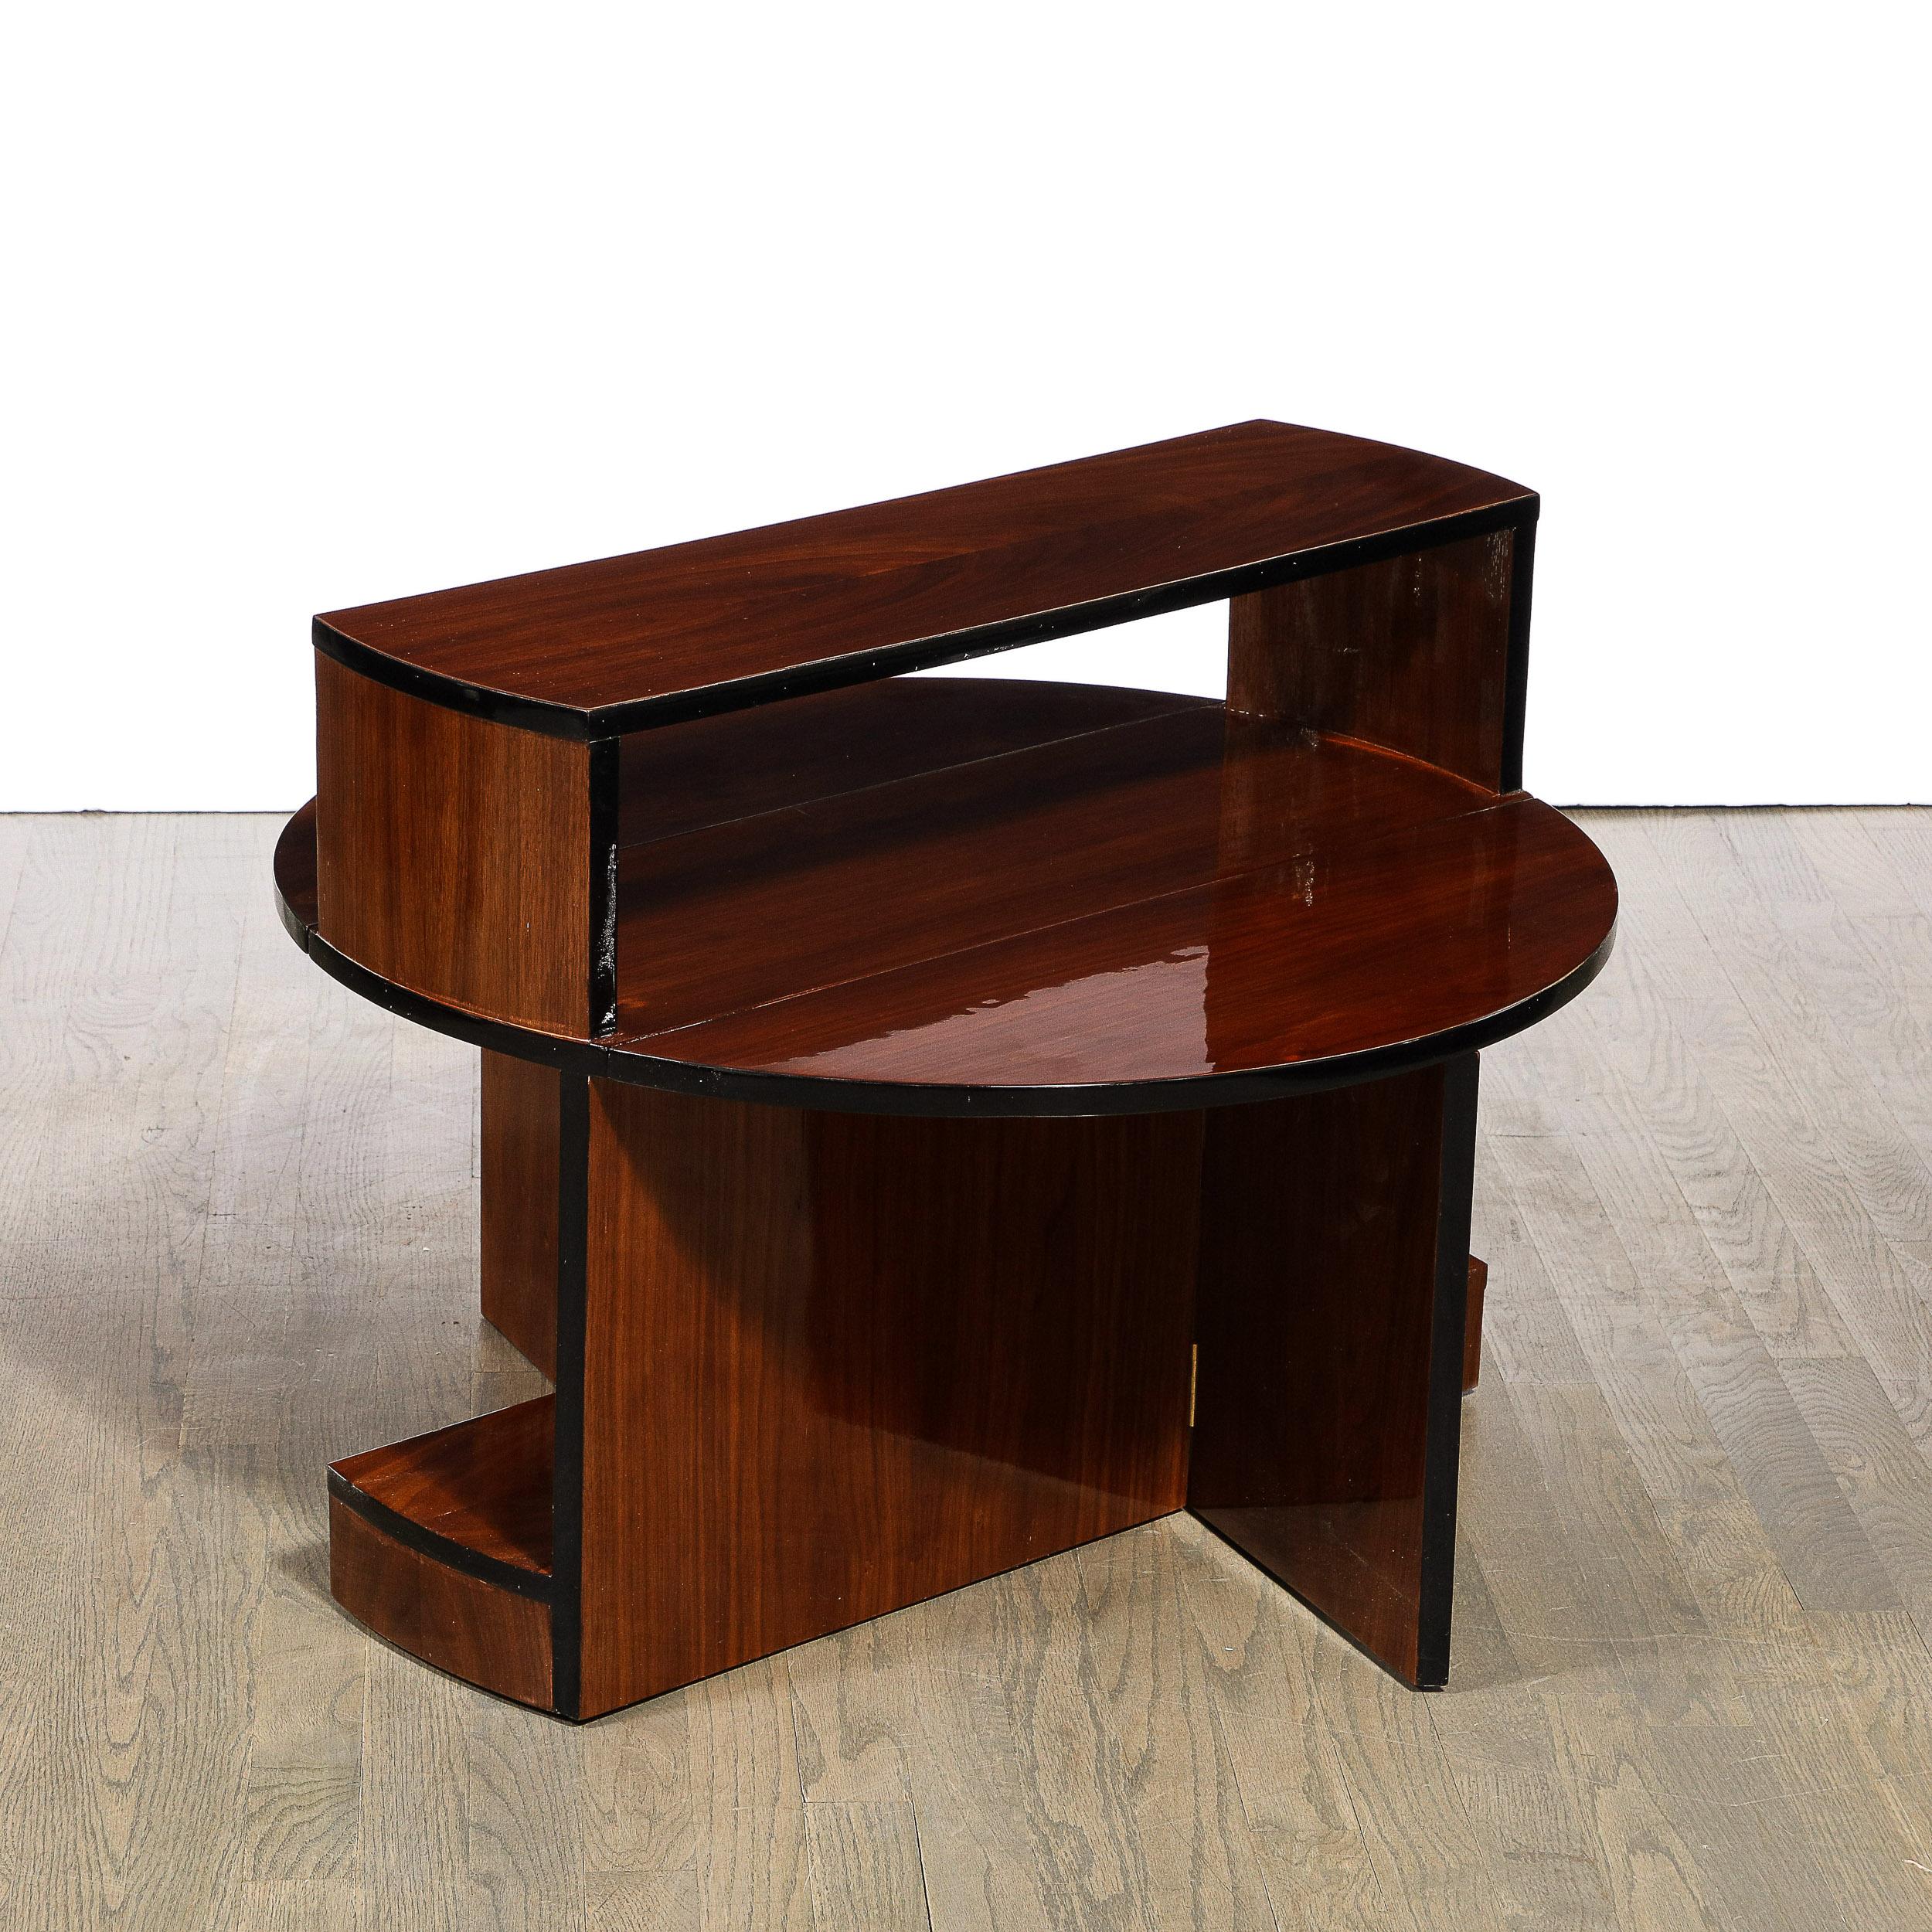 Art Deco Machine Age Folding Coffee Table in Book-Matched Walnut & Black Lacquer 1